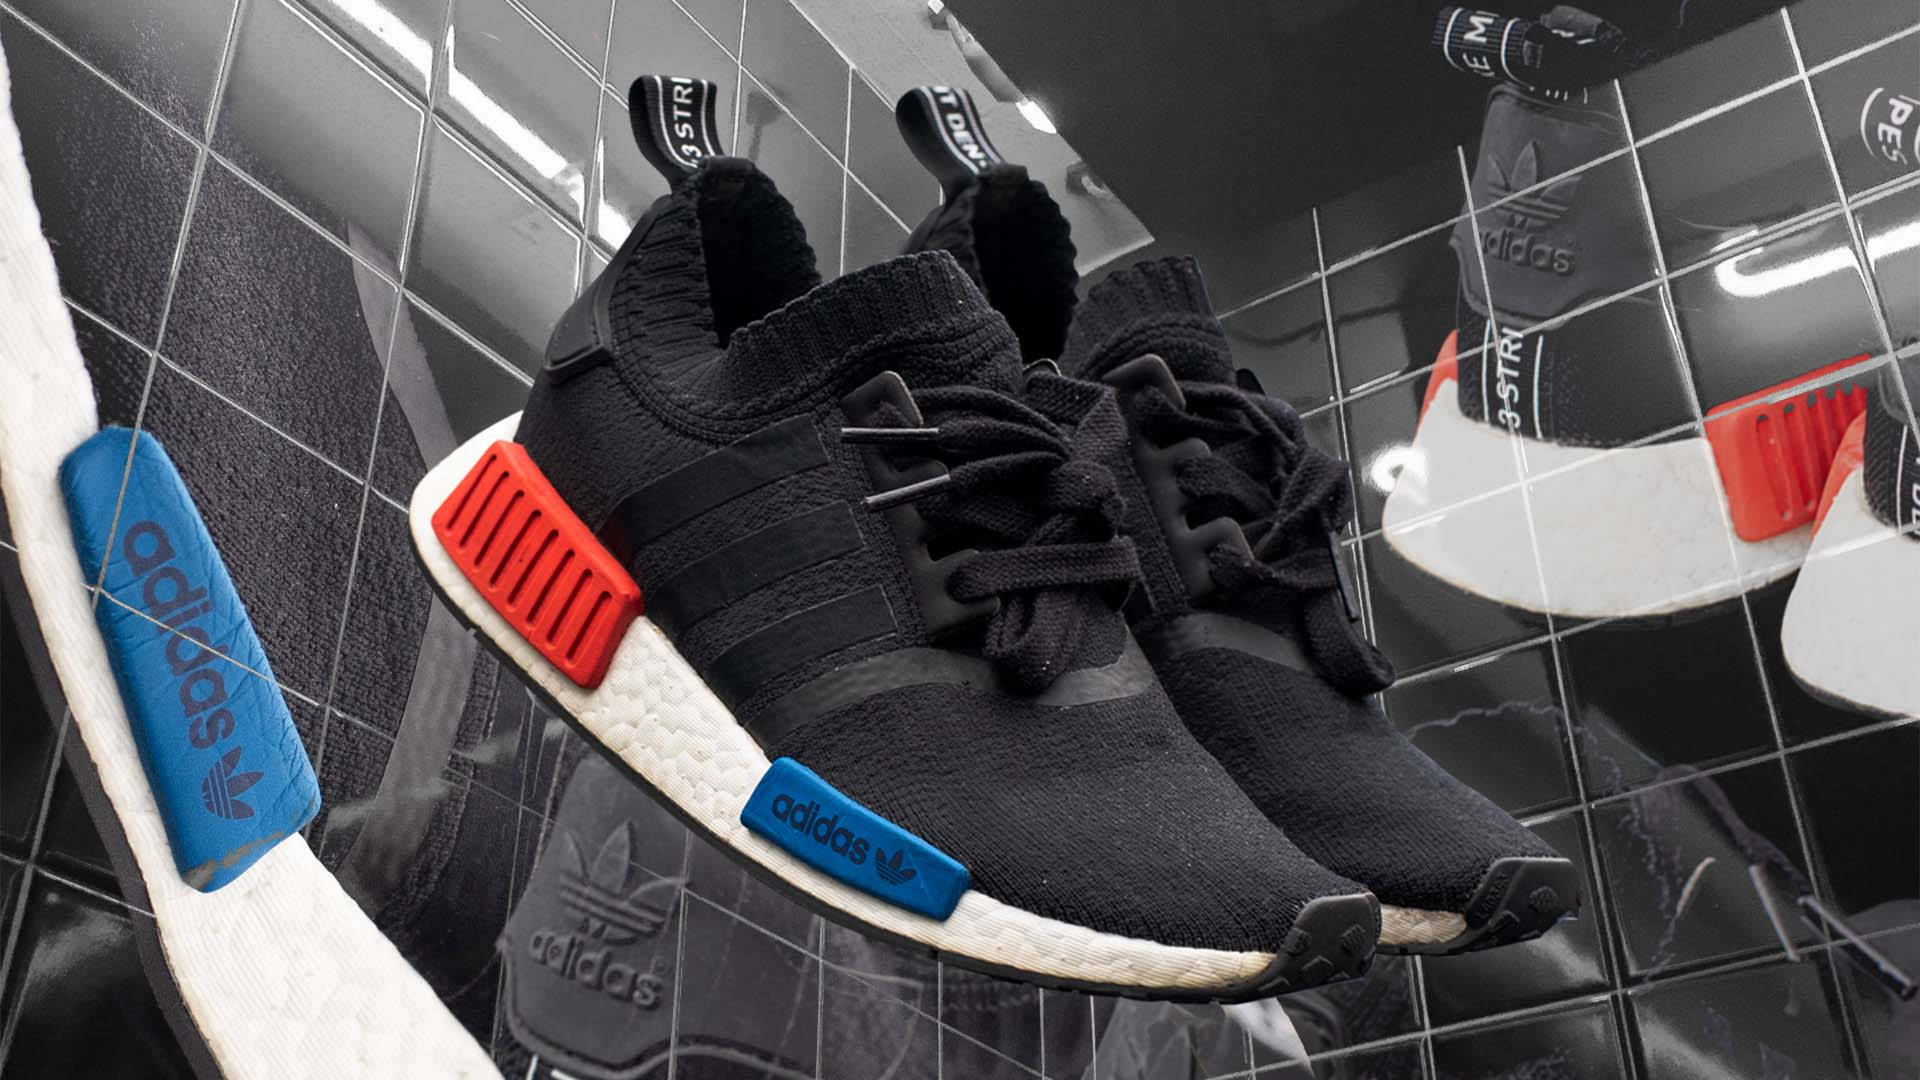 Adidas NMD x Louis Vuitton Limited Edition side 9.5 US for Sale in